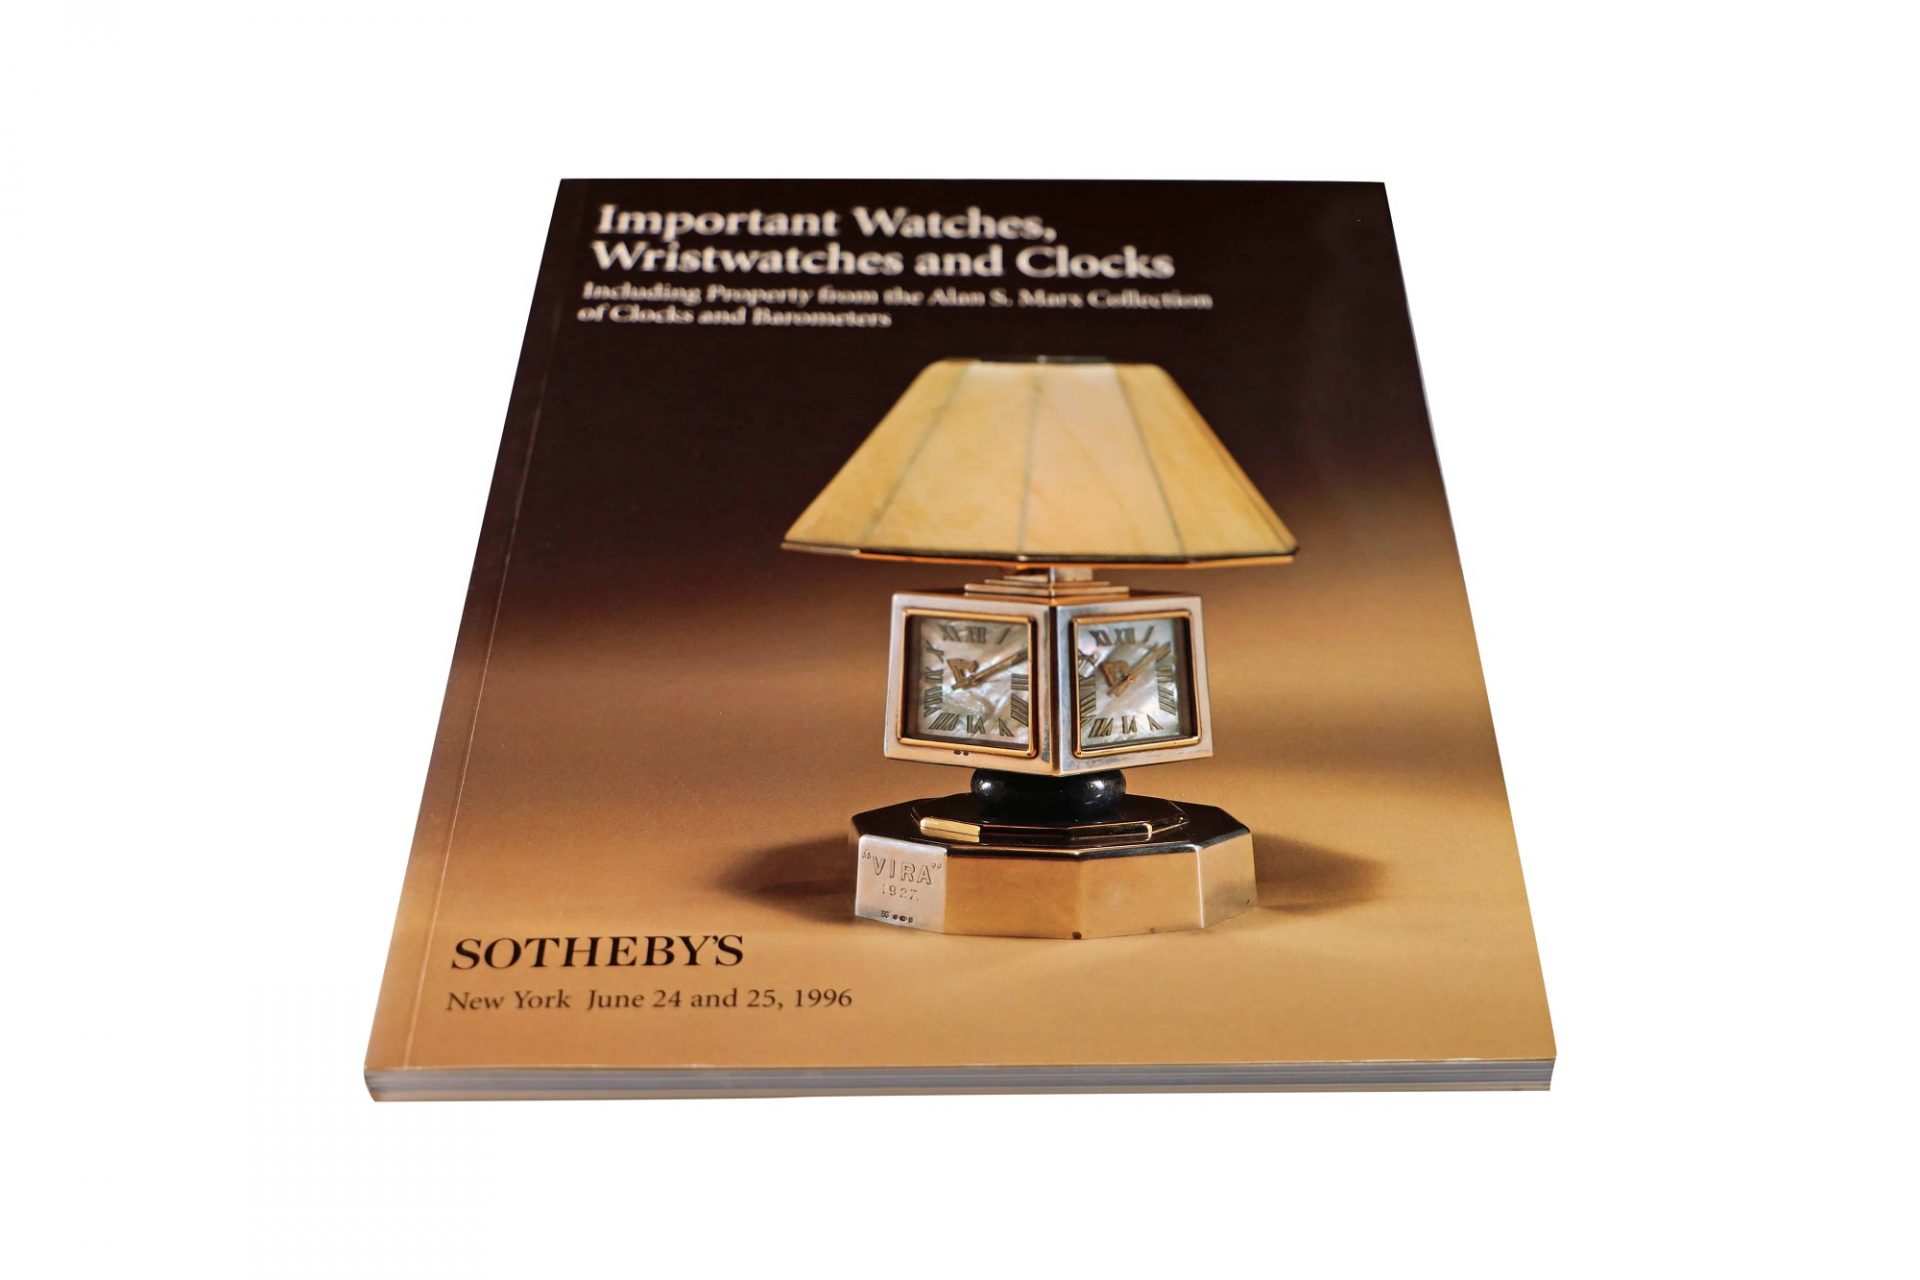 Sotheby's Important , Watches, wristwatches And Clocks New York June 25, 1996 Auction Catalog - Rare Watch Parts